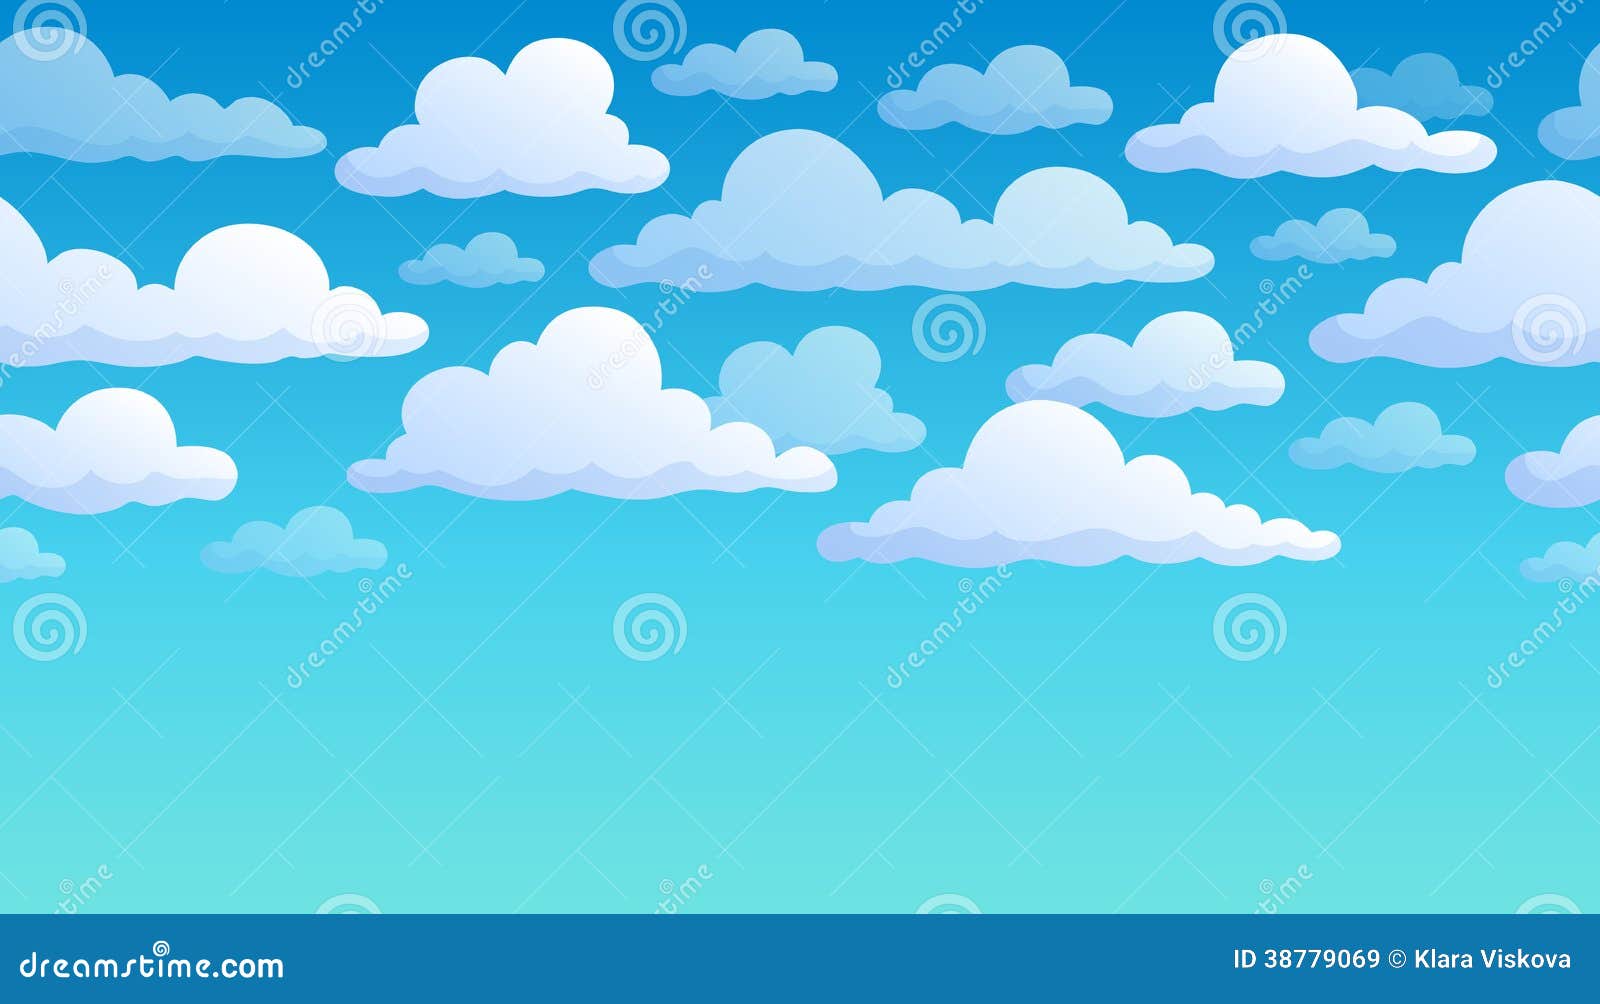 cloudy sky background 7